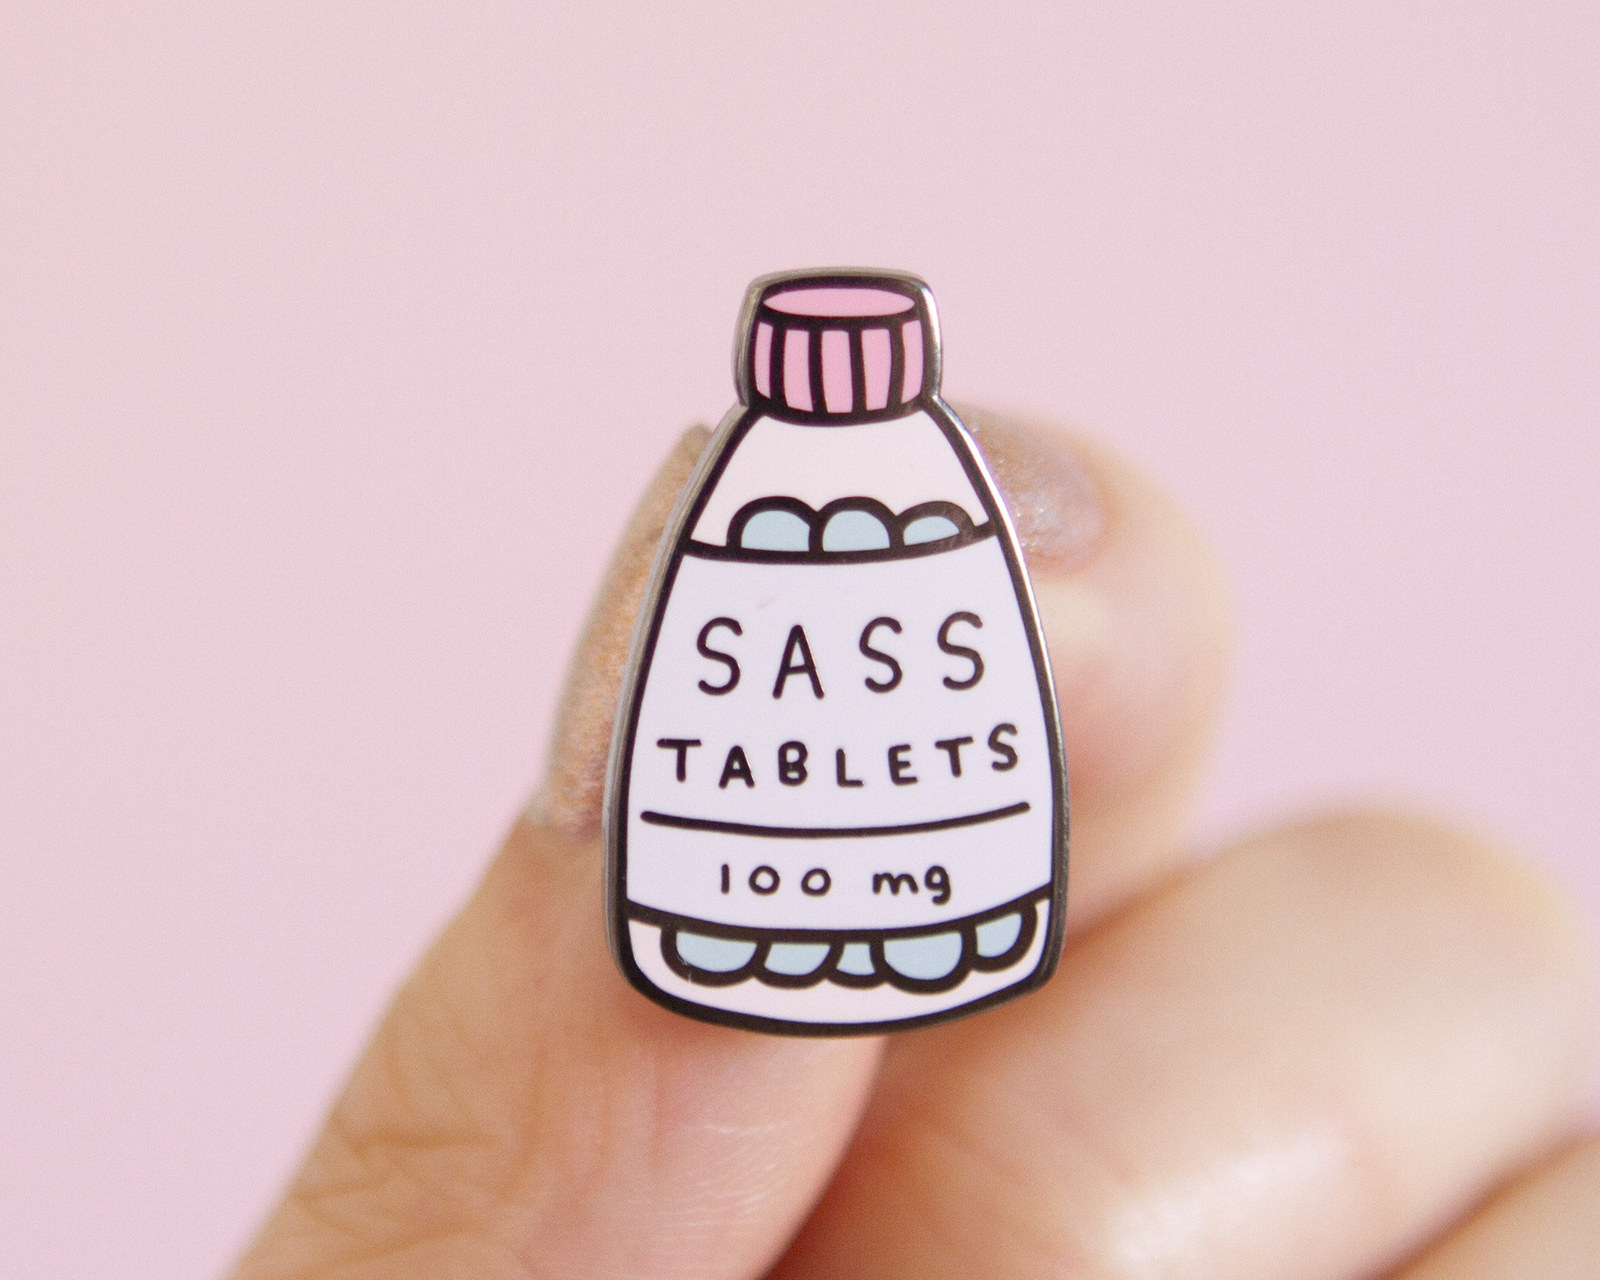 A small pink pin that looks like a bottle of pills. The pin says &quot;Sass Tablets&quot; 